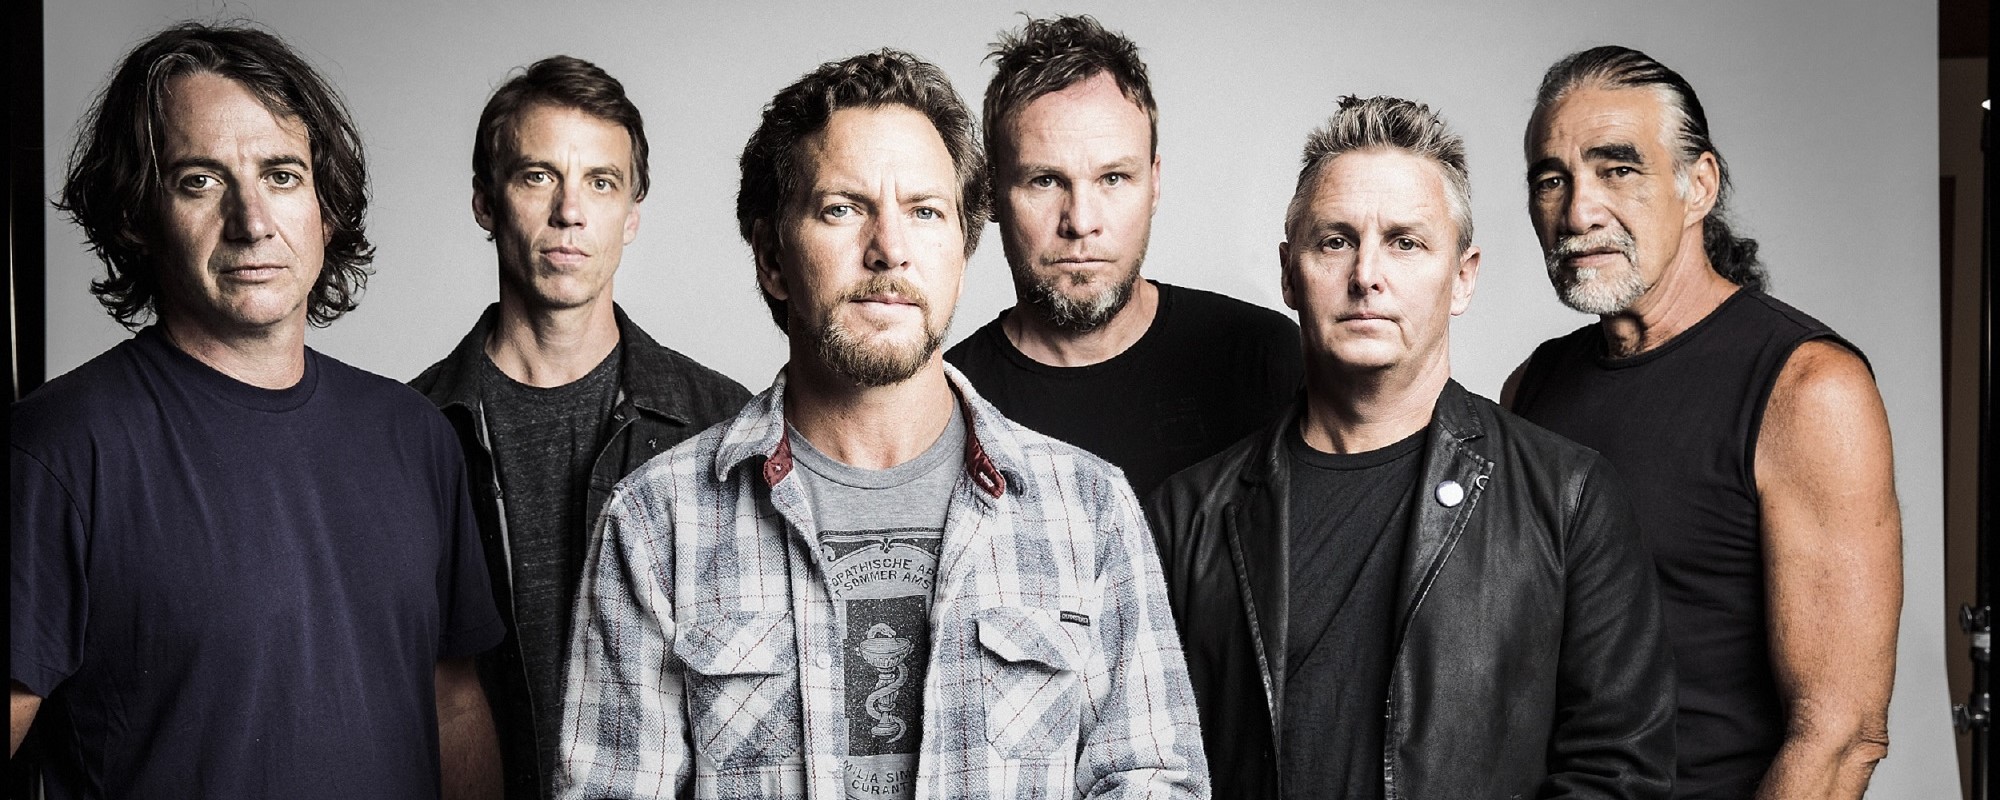 Pearl Jam Debuts New Album at Private Listening Party; Eddie Vedder Calls It “Our Best Work”